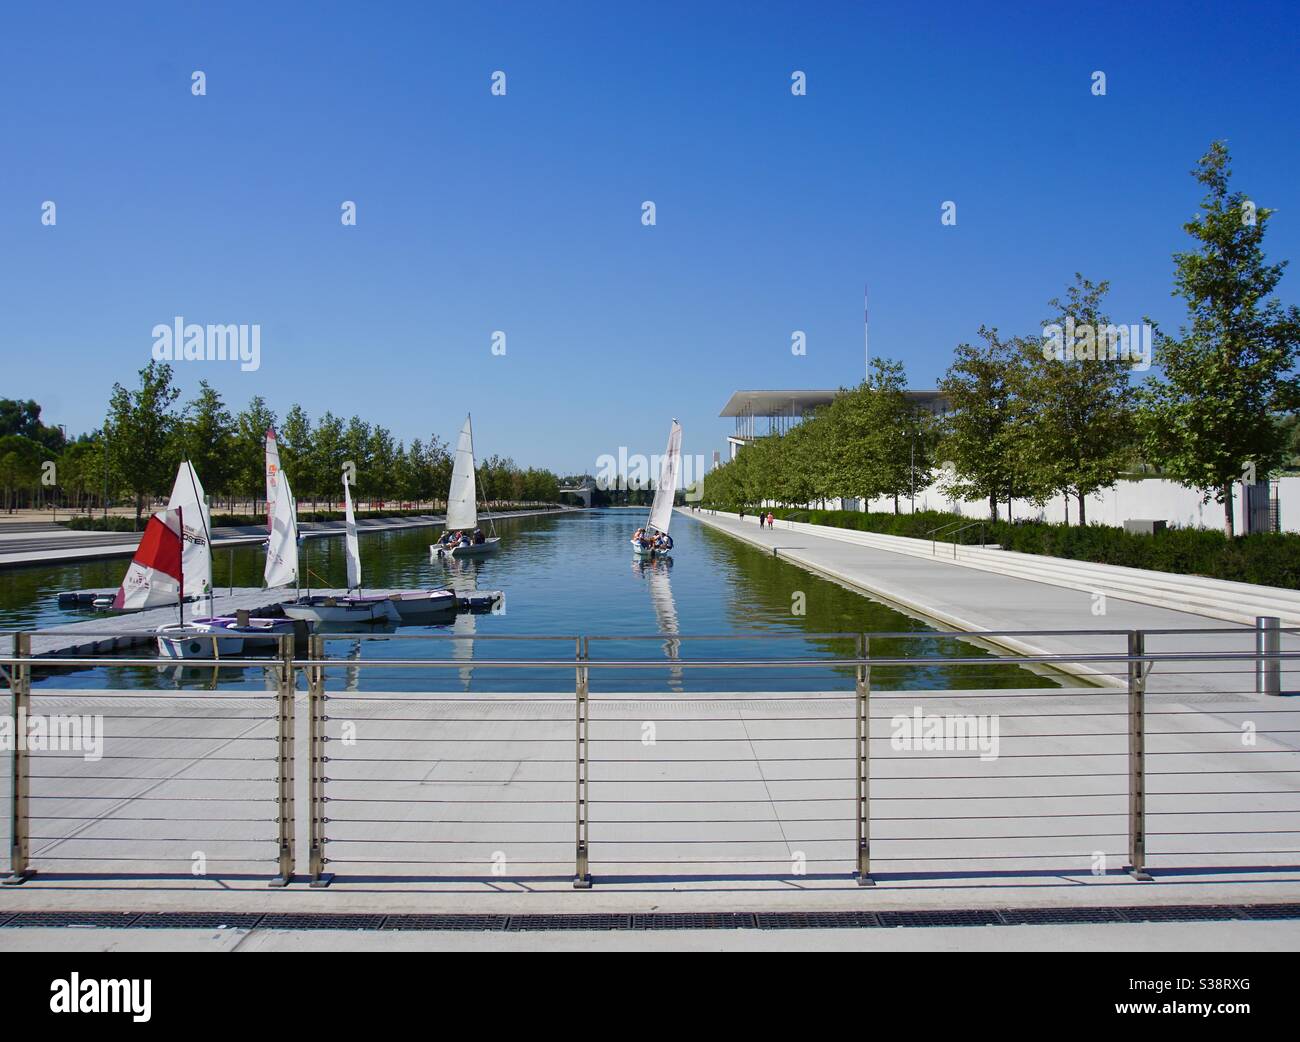 The Stavros Niarchos Foundation Cultural Centre and Park in Faliro, Athens, Greece.  Designed by Renzo Piano, this includes the Greek National Opera, the Greek National Library and other facilities. Stock Photo